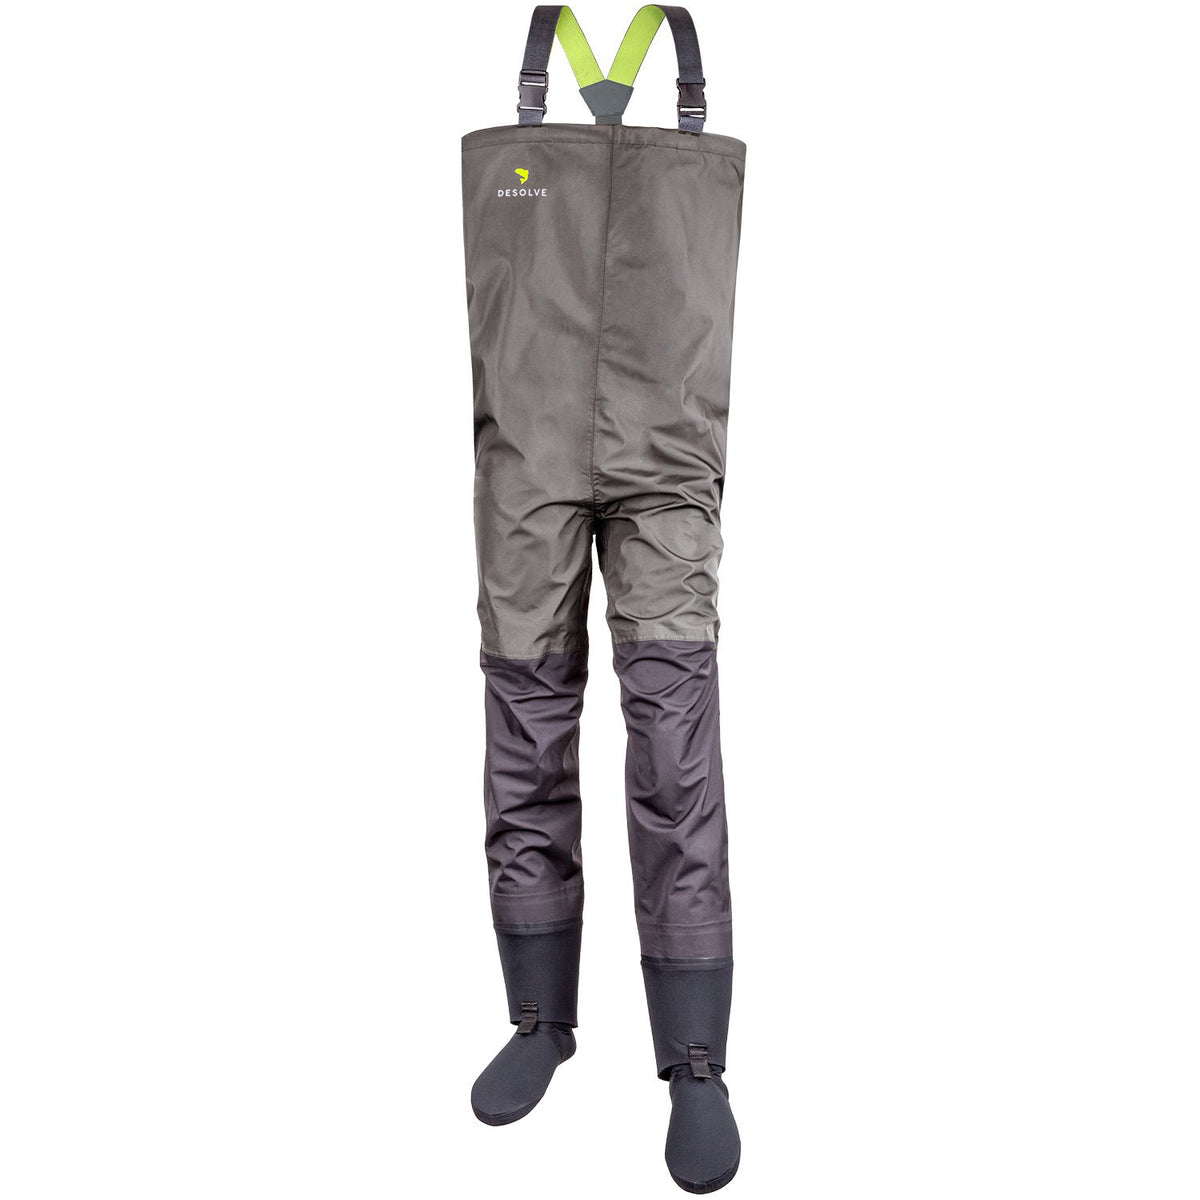 Desolve Supply Co, Rapid Wader, 4mm Neoprene, Quality Neoprene Lined  Boots, Velcro Tab Chest Pocket, Fly Fishing Waders, Mens - Desolve  Supply Co.